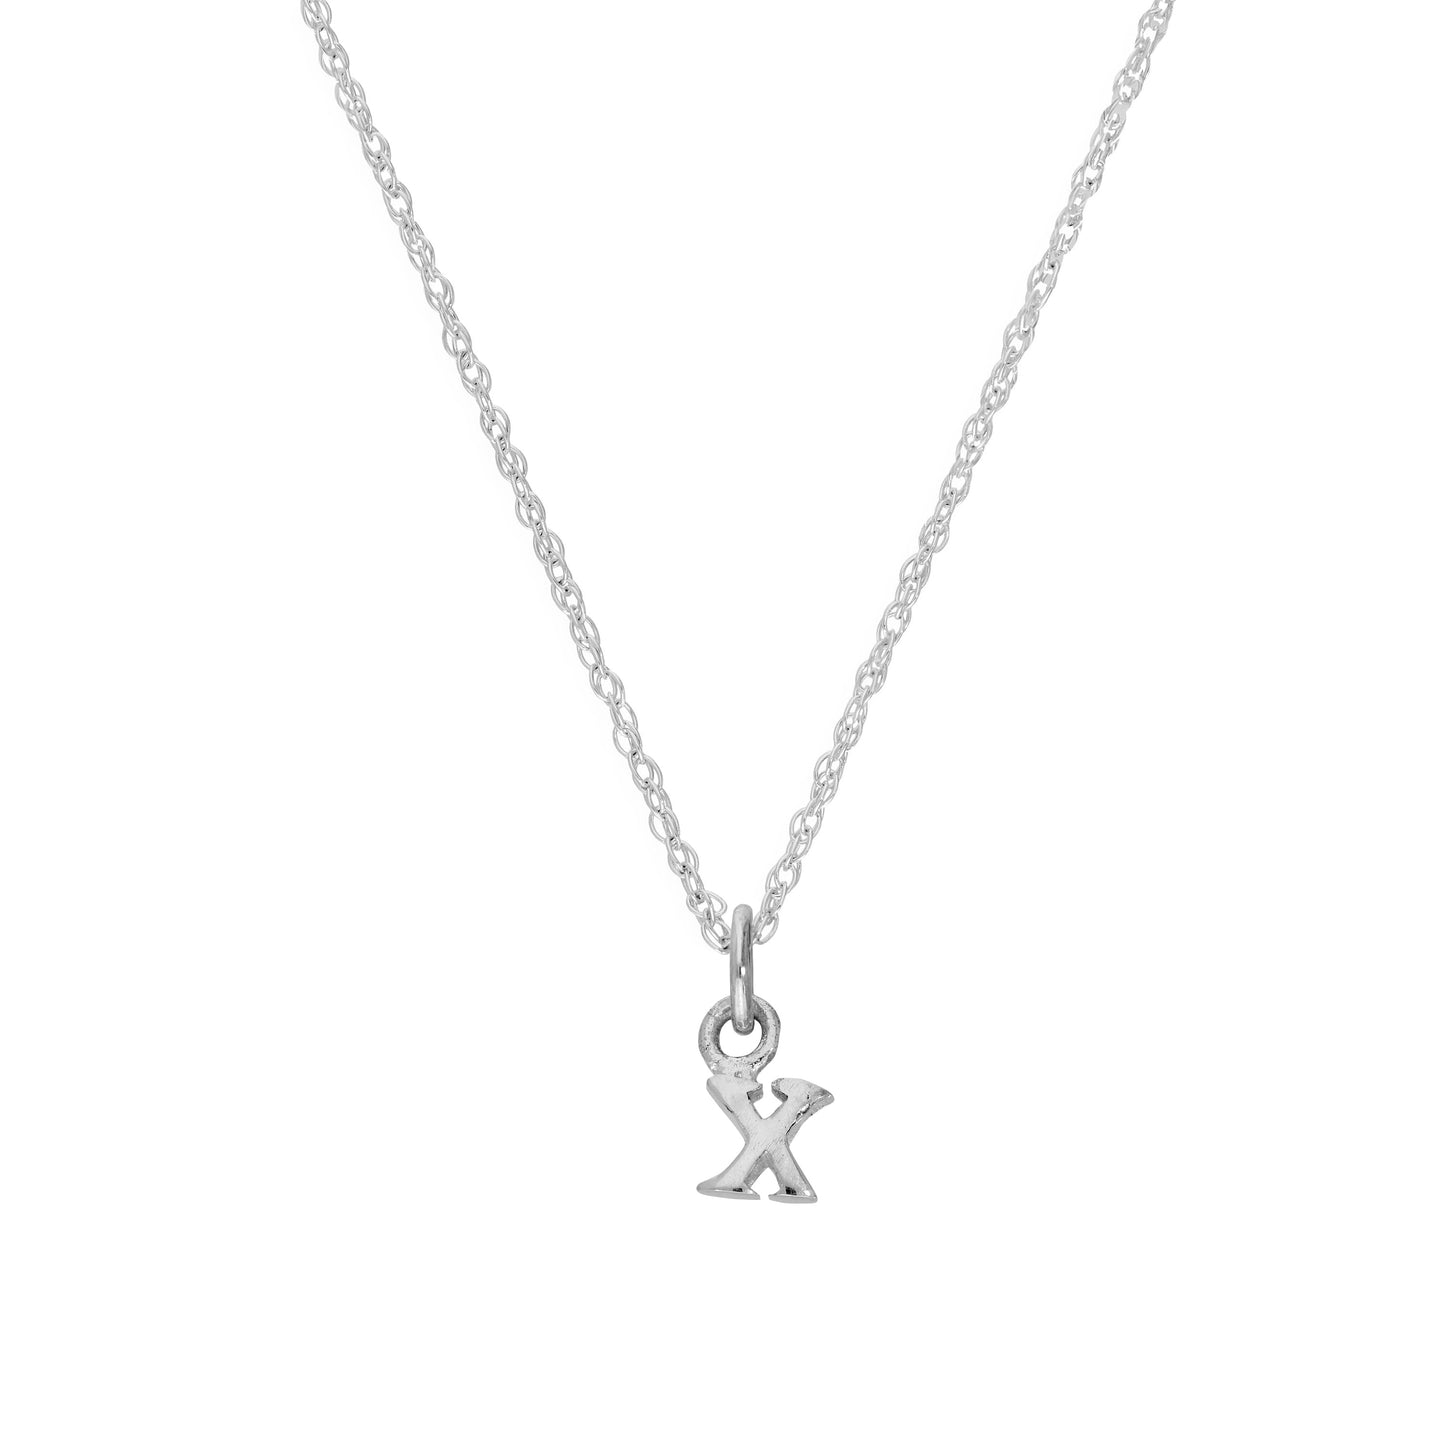 Tiny Sterling Silver Alphabet Letter X Pendant Necklace 14 - 22 Inches